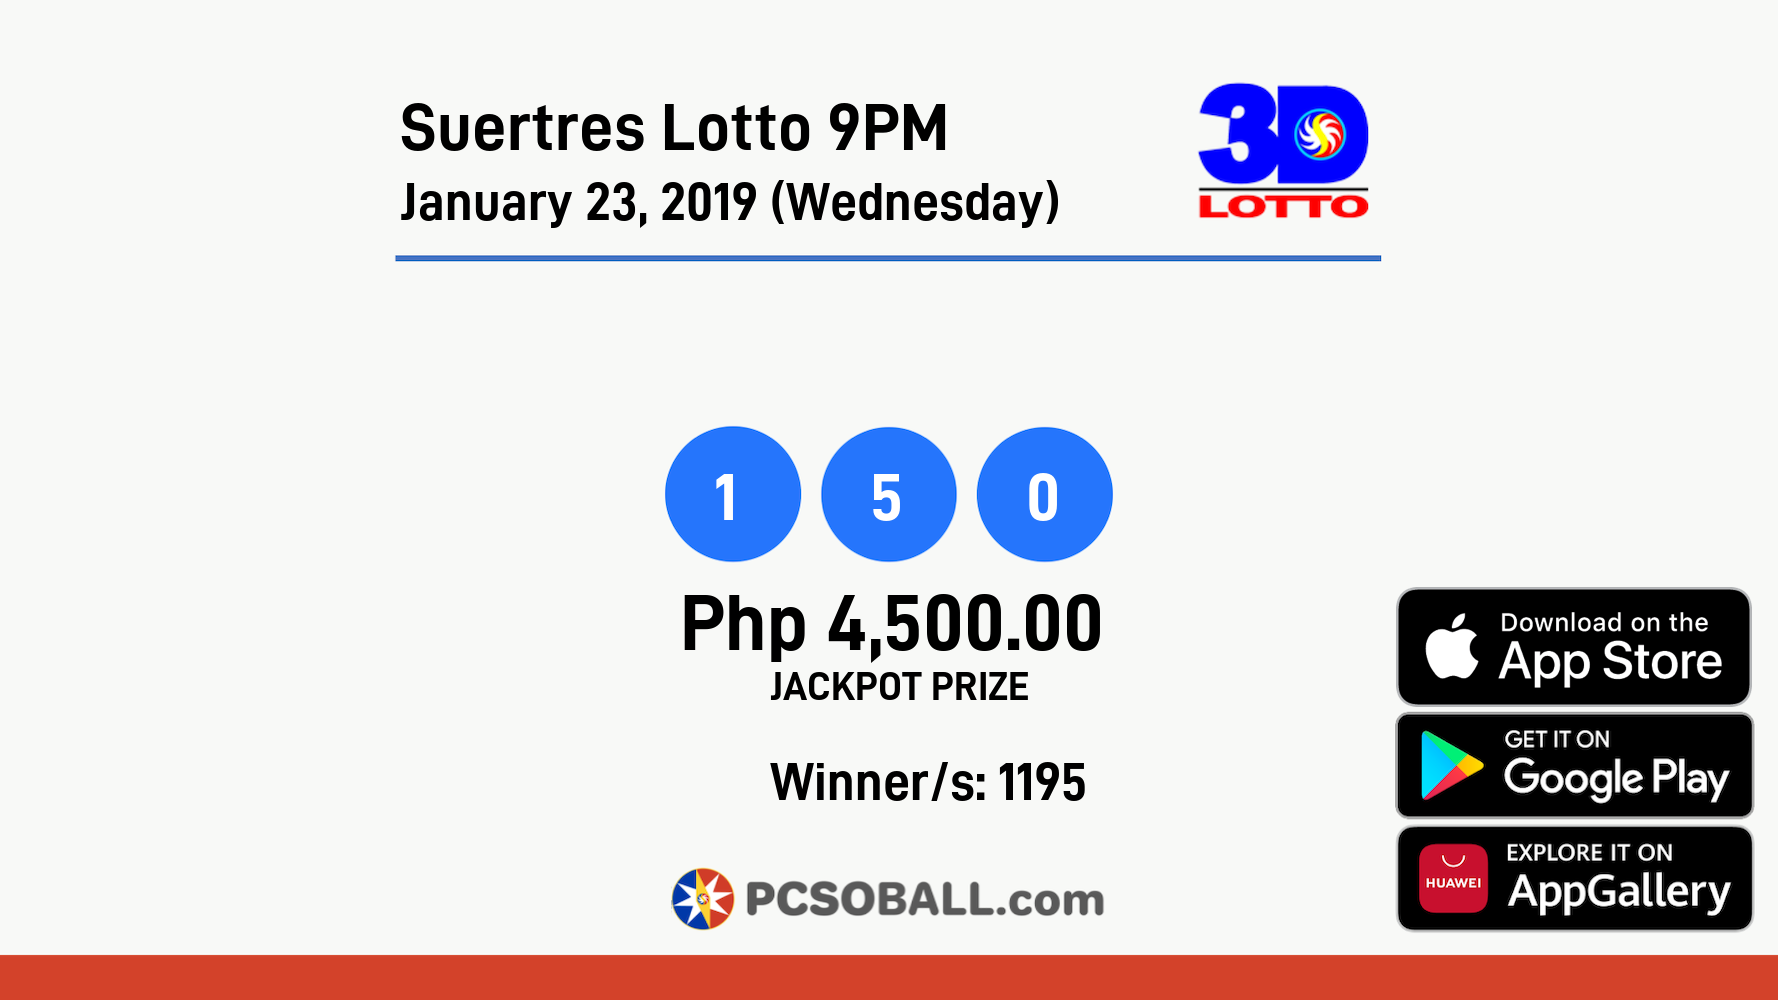 Suertres Lotto 9PM January 23, 2019 (Wednesday) Result